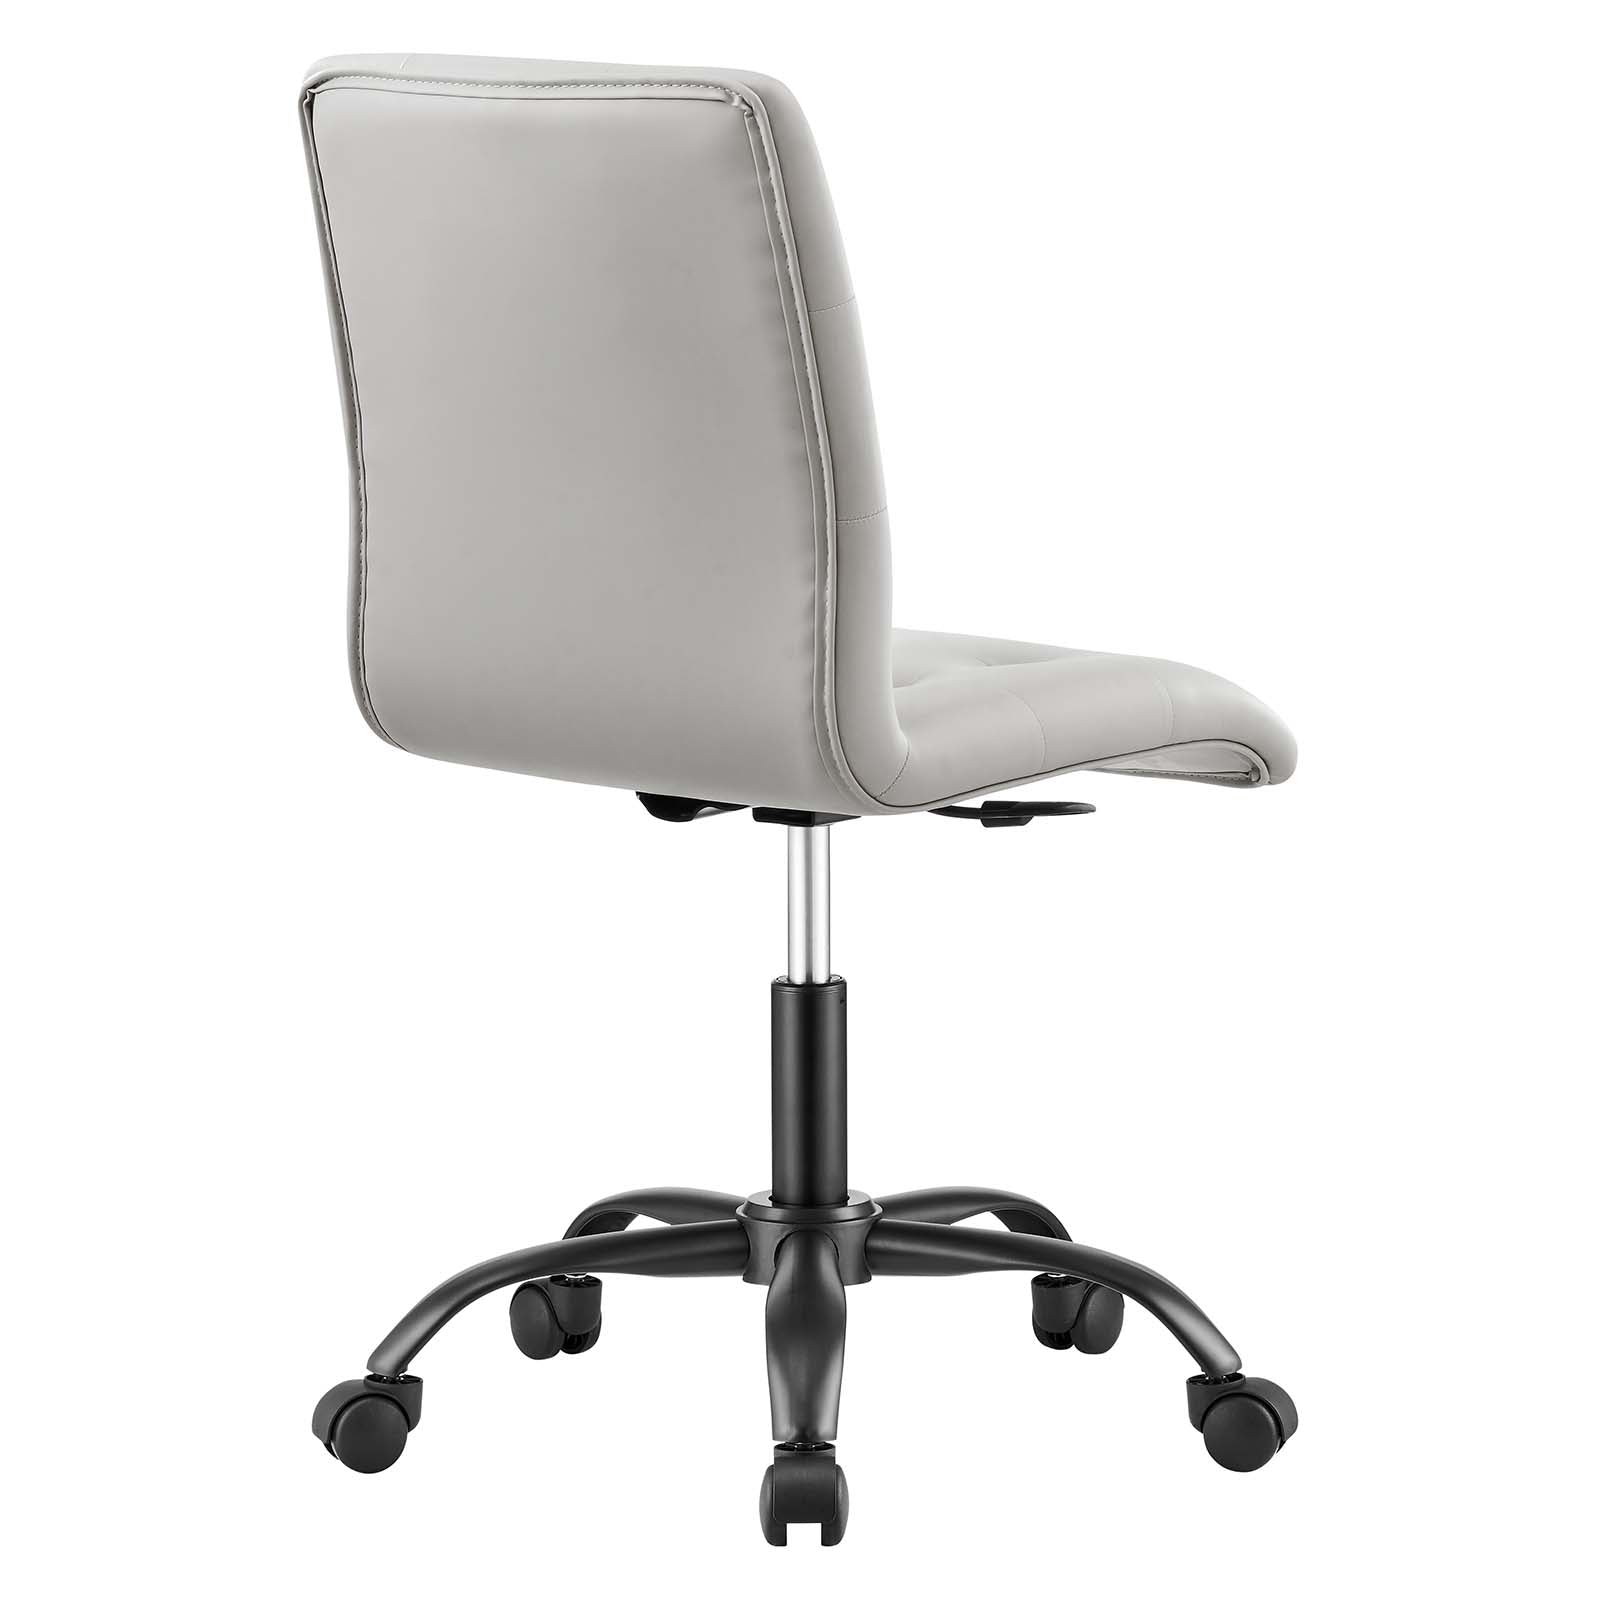 Prim Armless Vegan Leather Office Chair-Desk Chair-Modway-Wall2Wall Furnishings